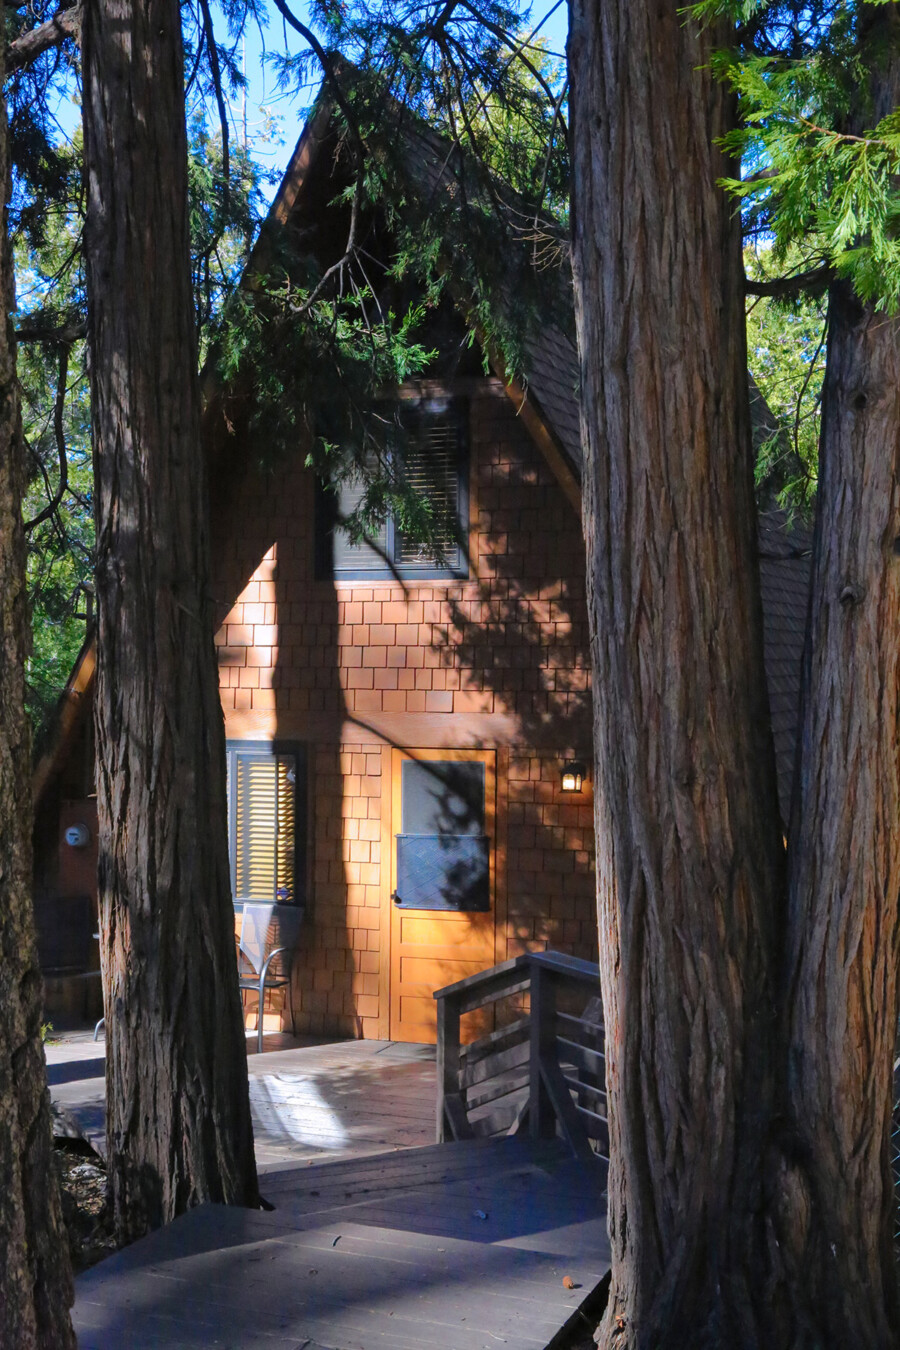 Exterior of A-frame vacation rental Idylcove in Idyllwild, California.